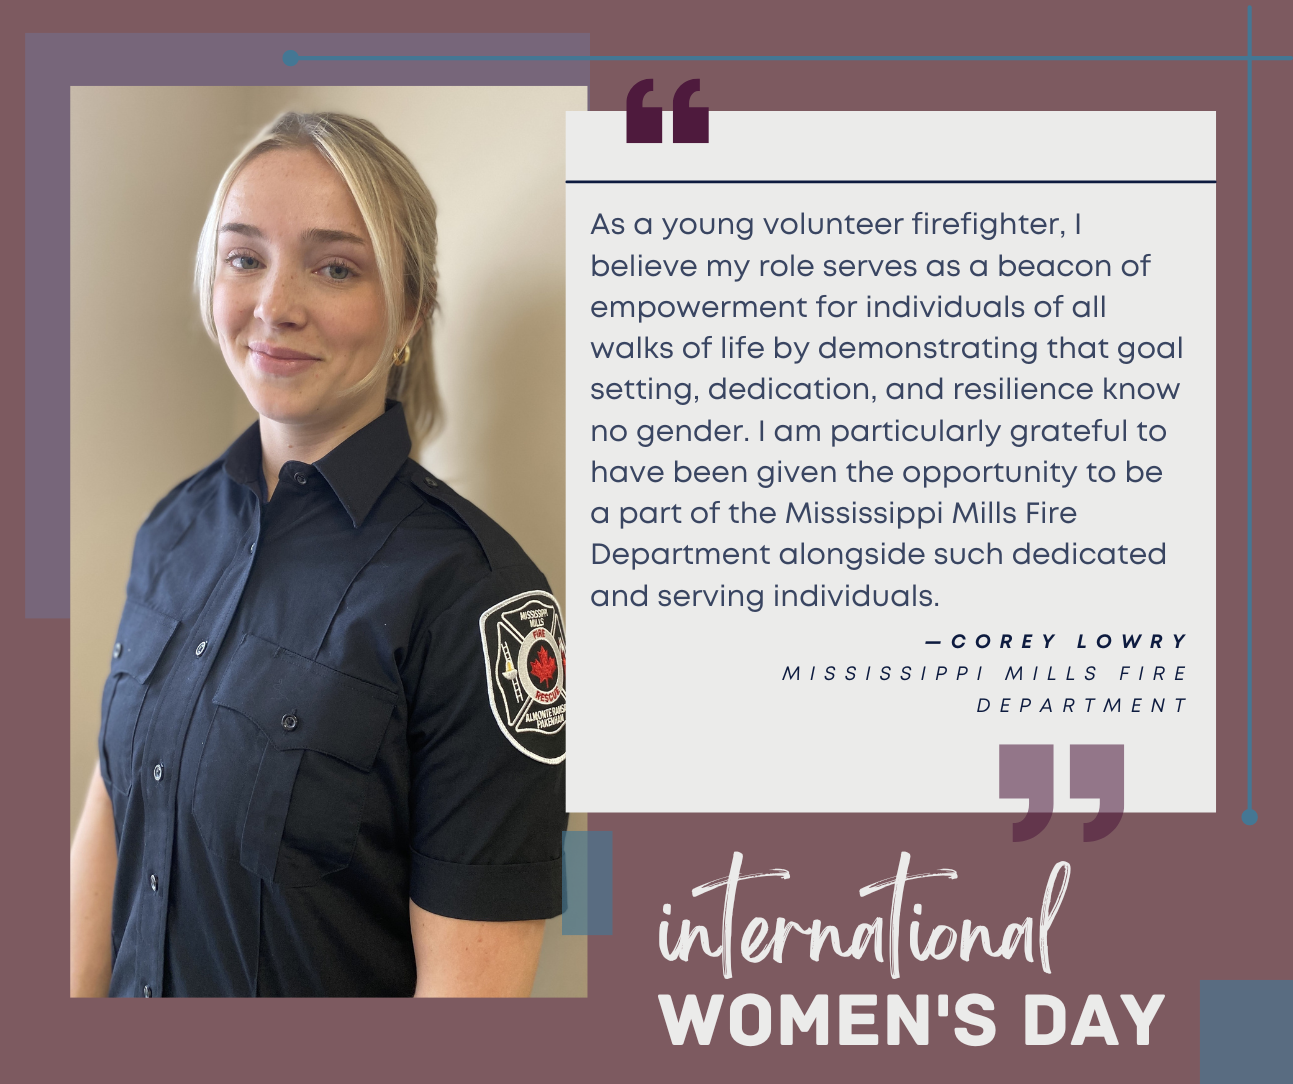 Graphic featuring pull out quote and photo of a female firefighter wearing uniform with Mississippi Mills Fire Department crest